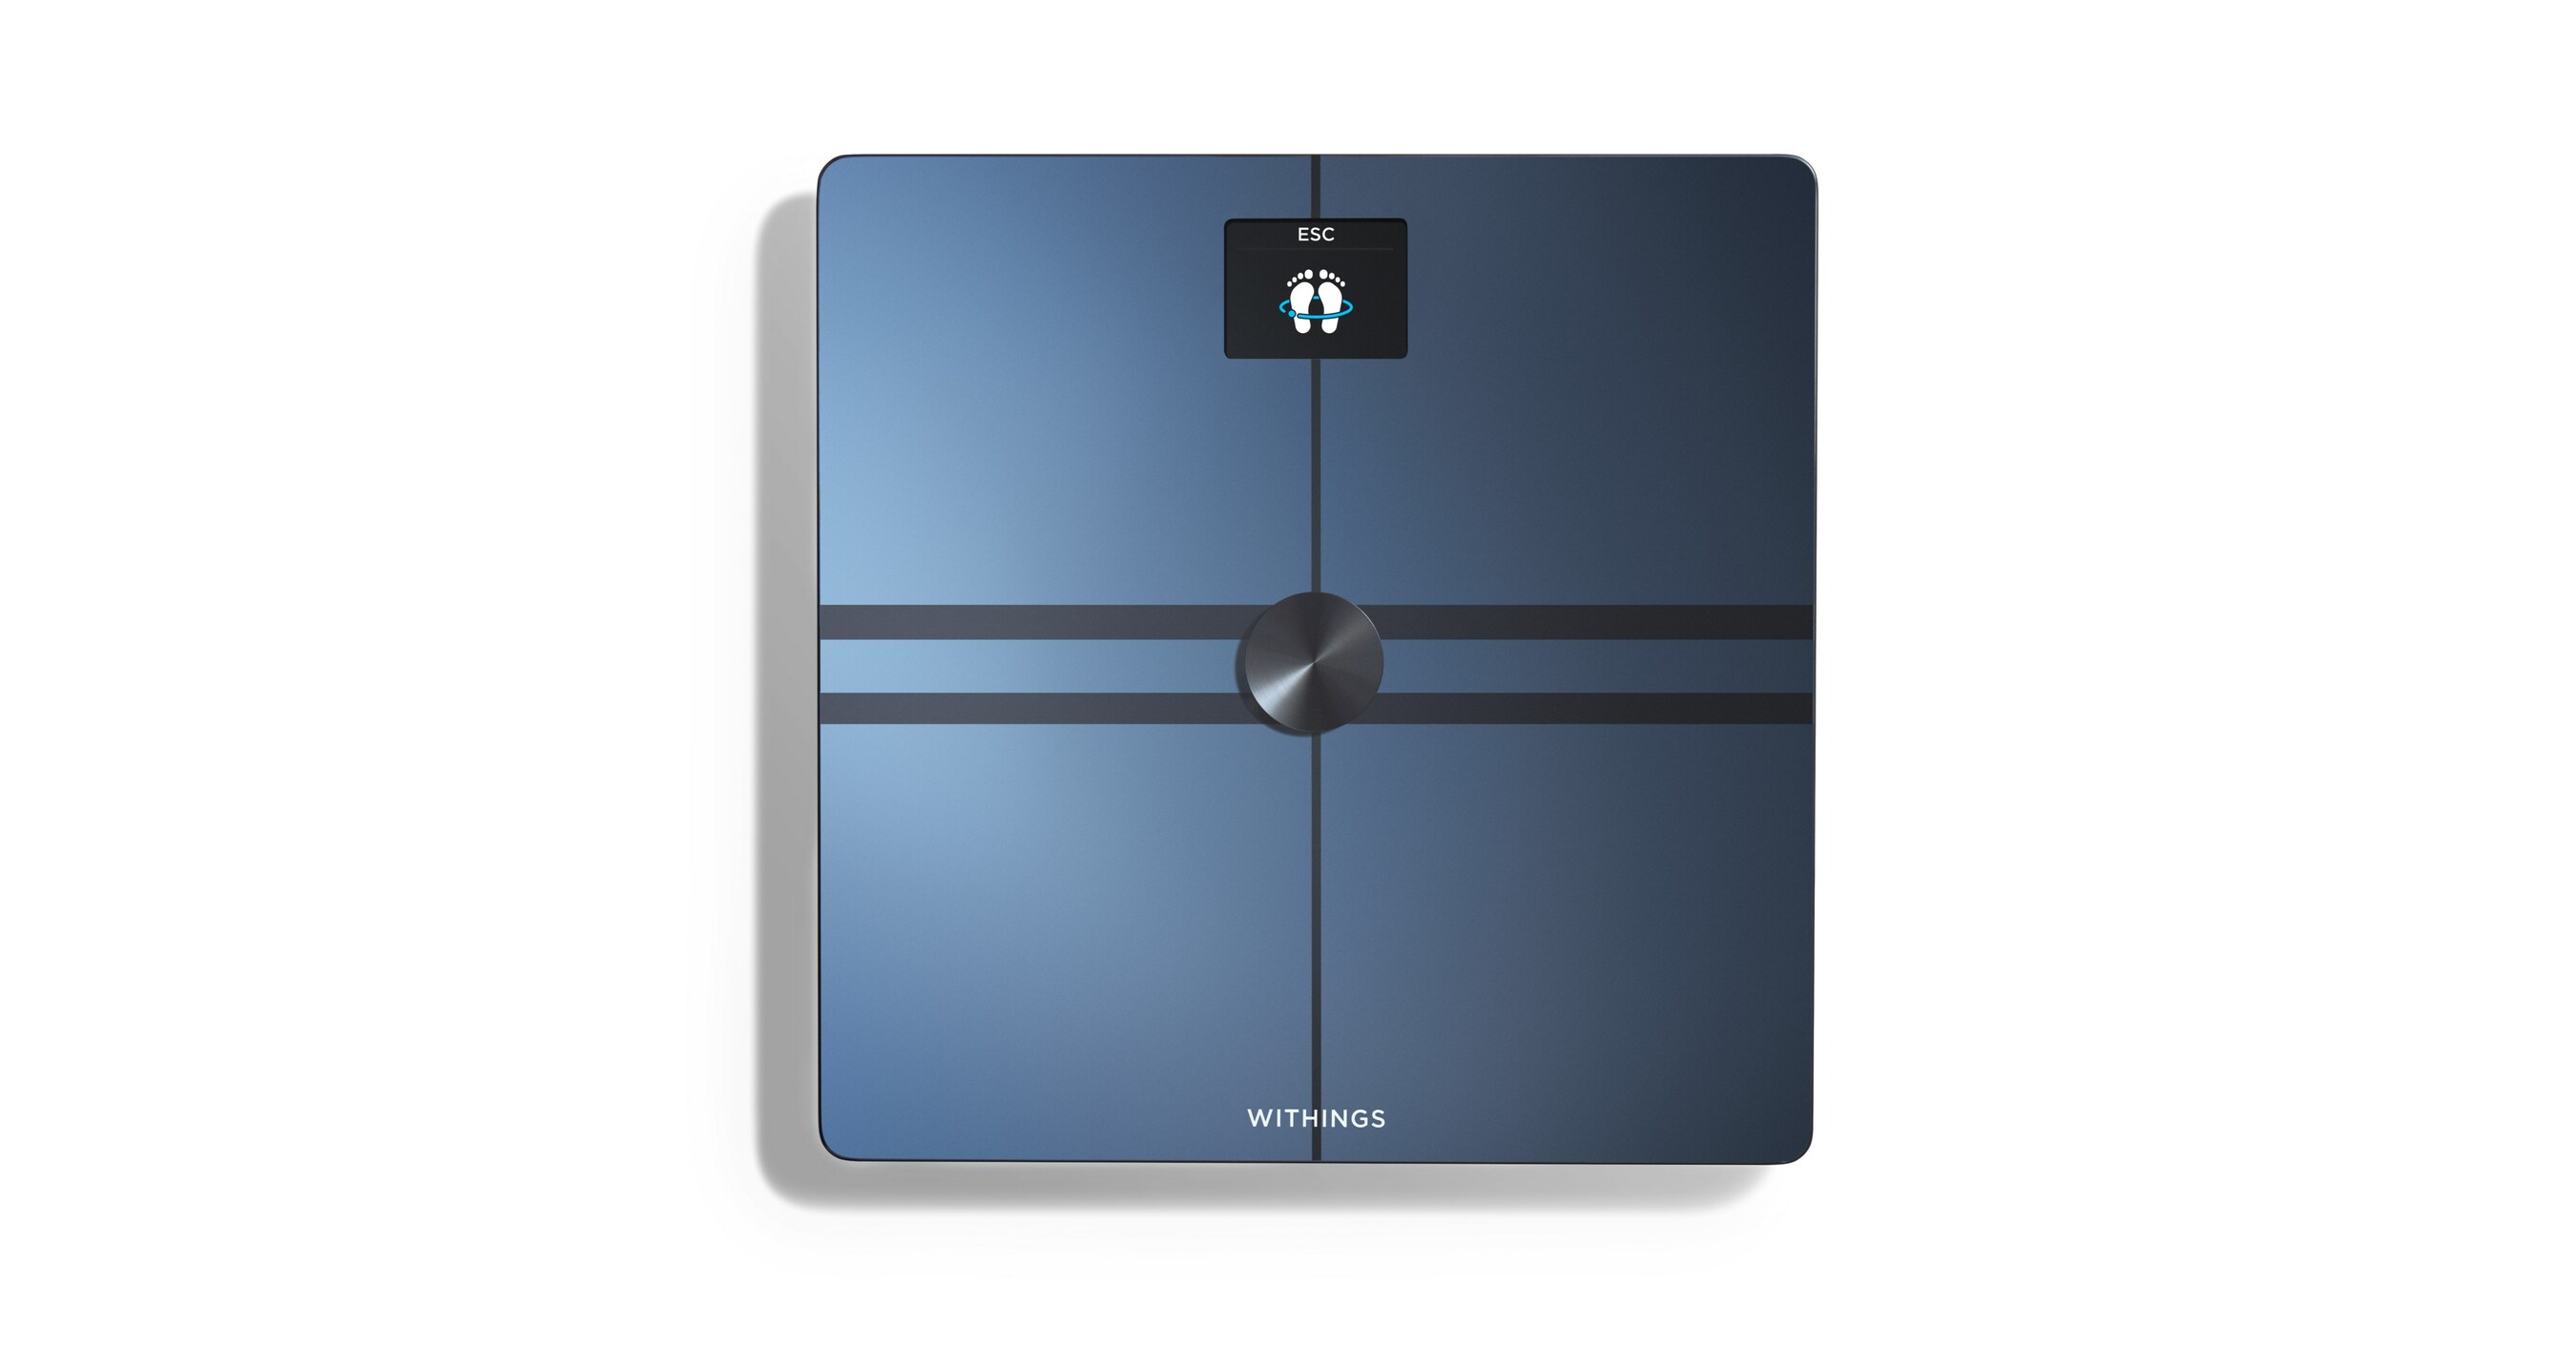 The most advanced smart scale from Withings cleared by FDA [U: Now